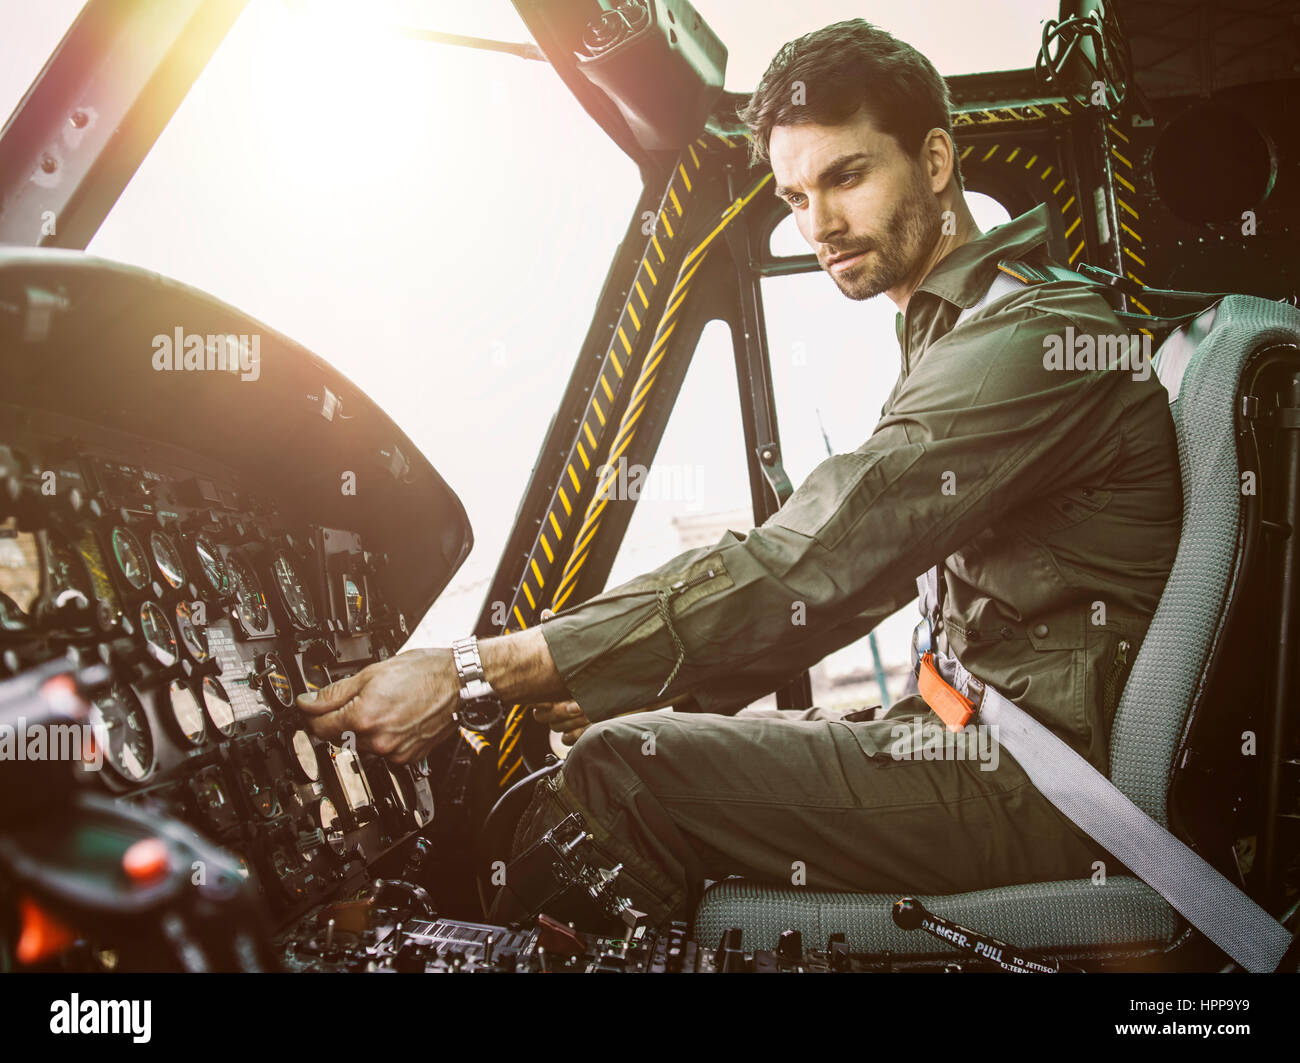 Pilot in cockpit of a helicopter Stock Photo